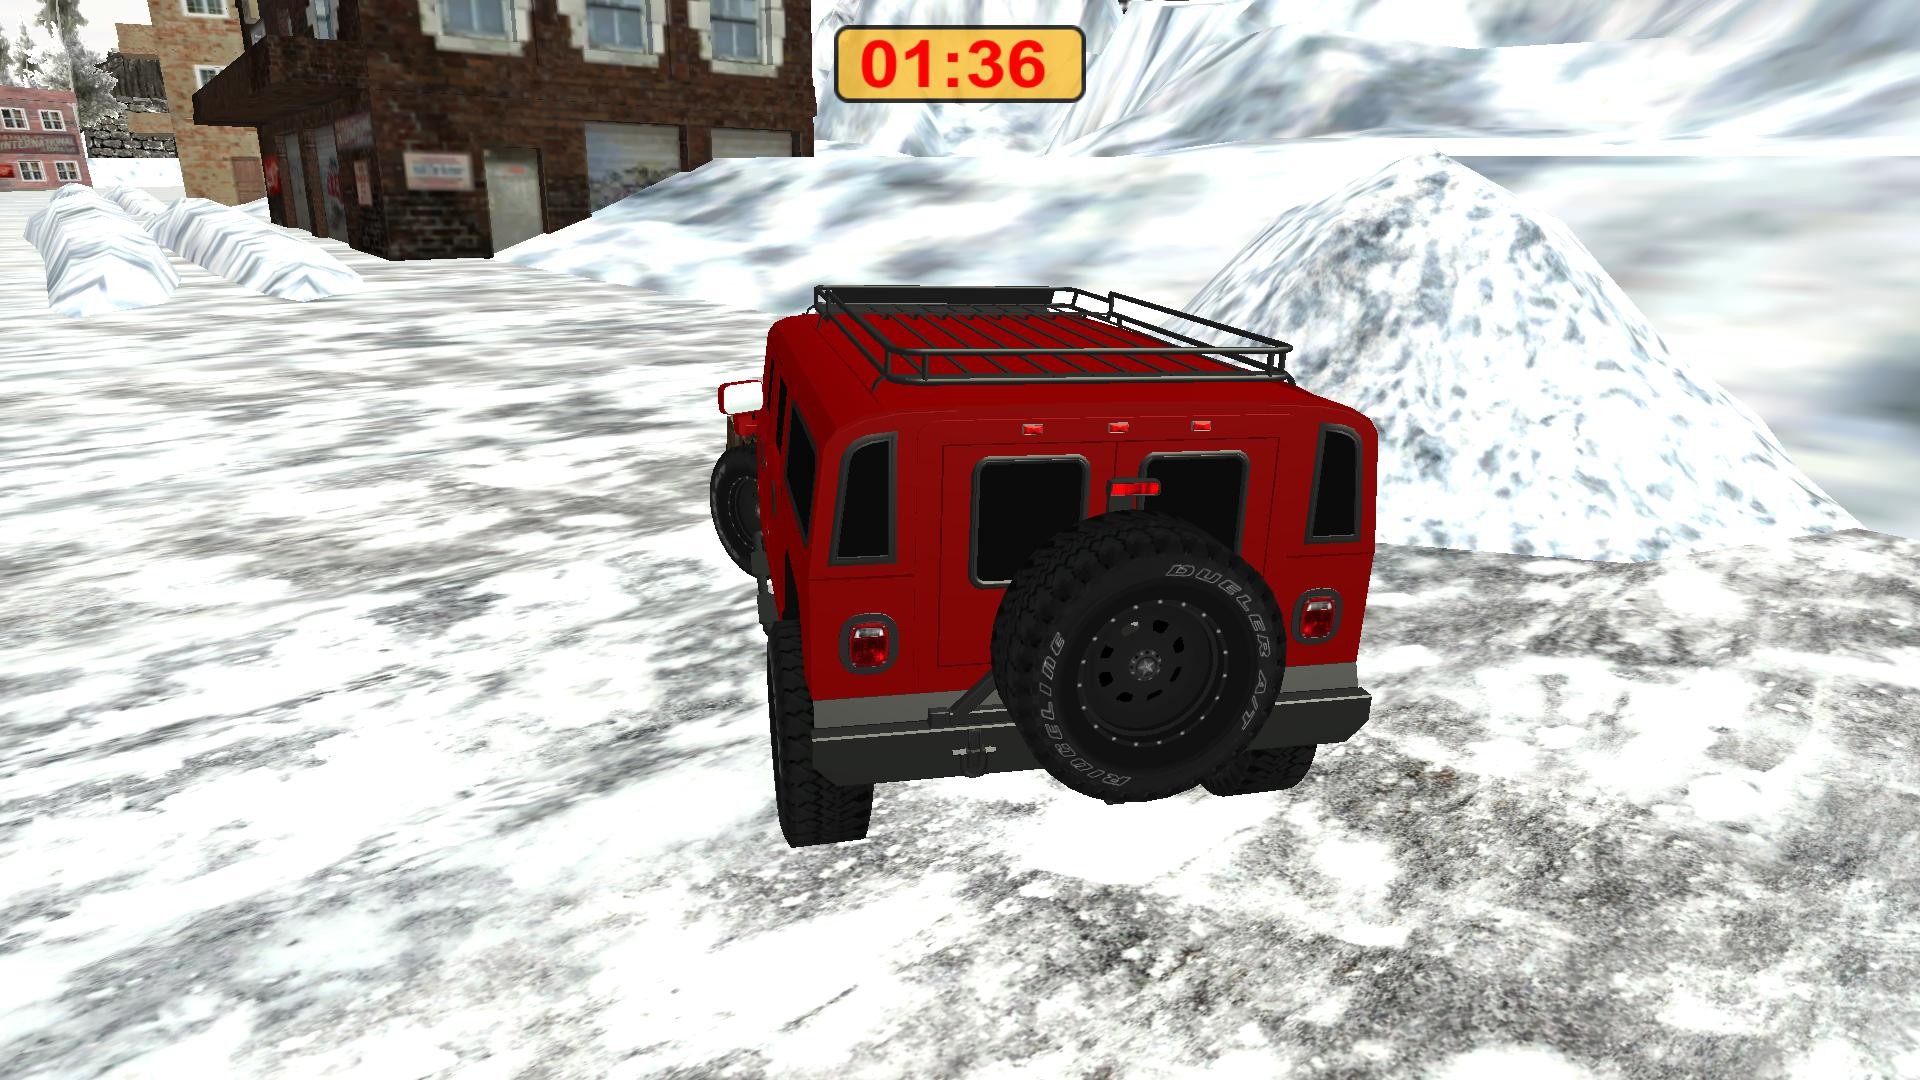 Snow Clearing Driving Simulator Steam CD Key, 5.12 usd